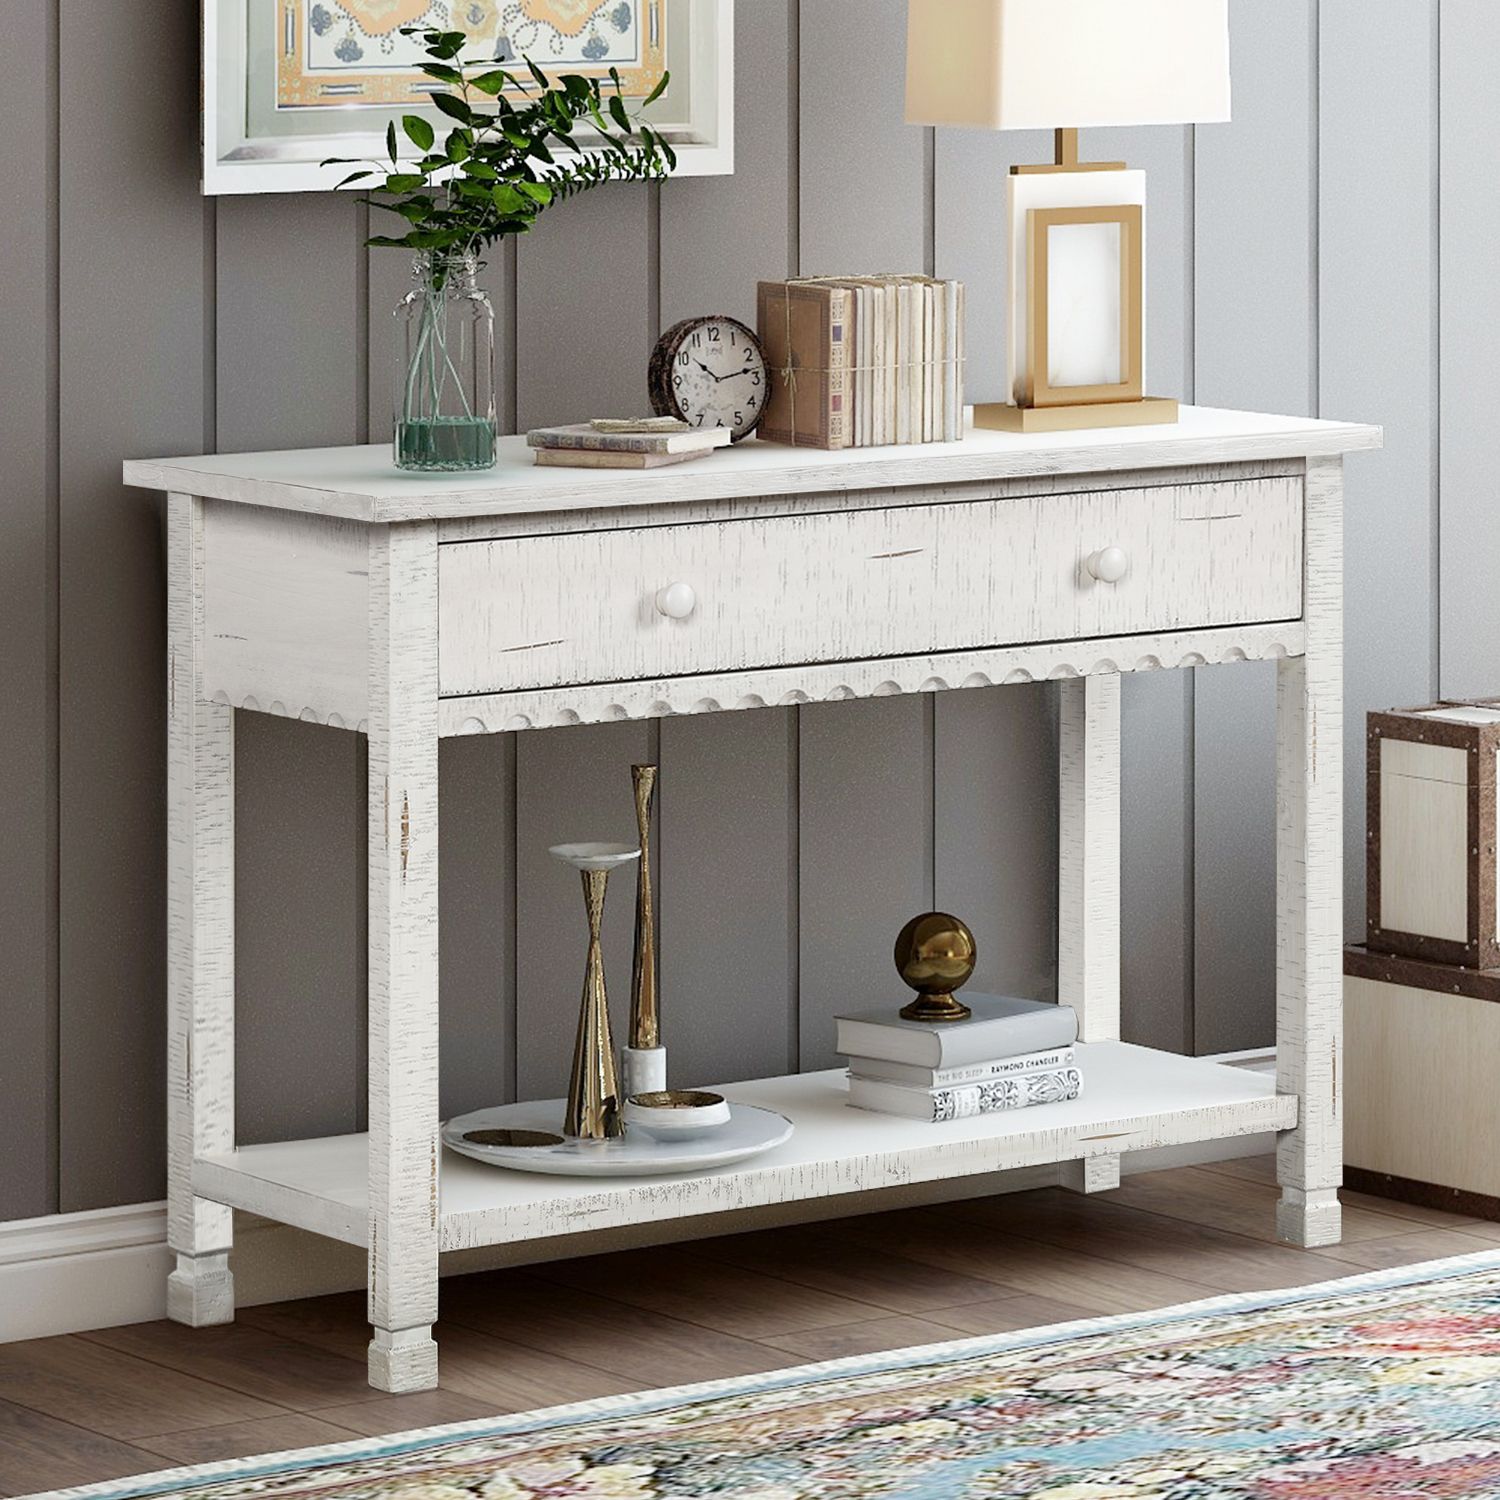 Wood Sofa Table With Storage, Wavy Edge Sofa Table With For Square Weathered White Wood Console Tables (View 9 of 20)